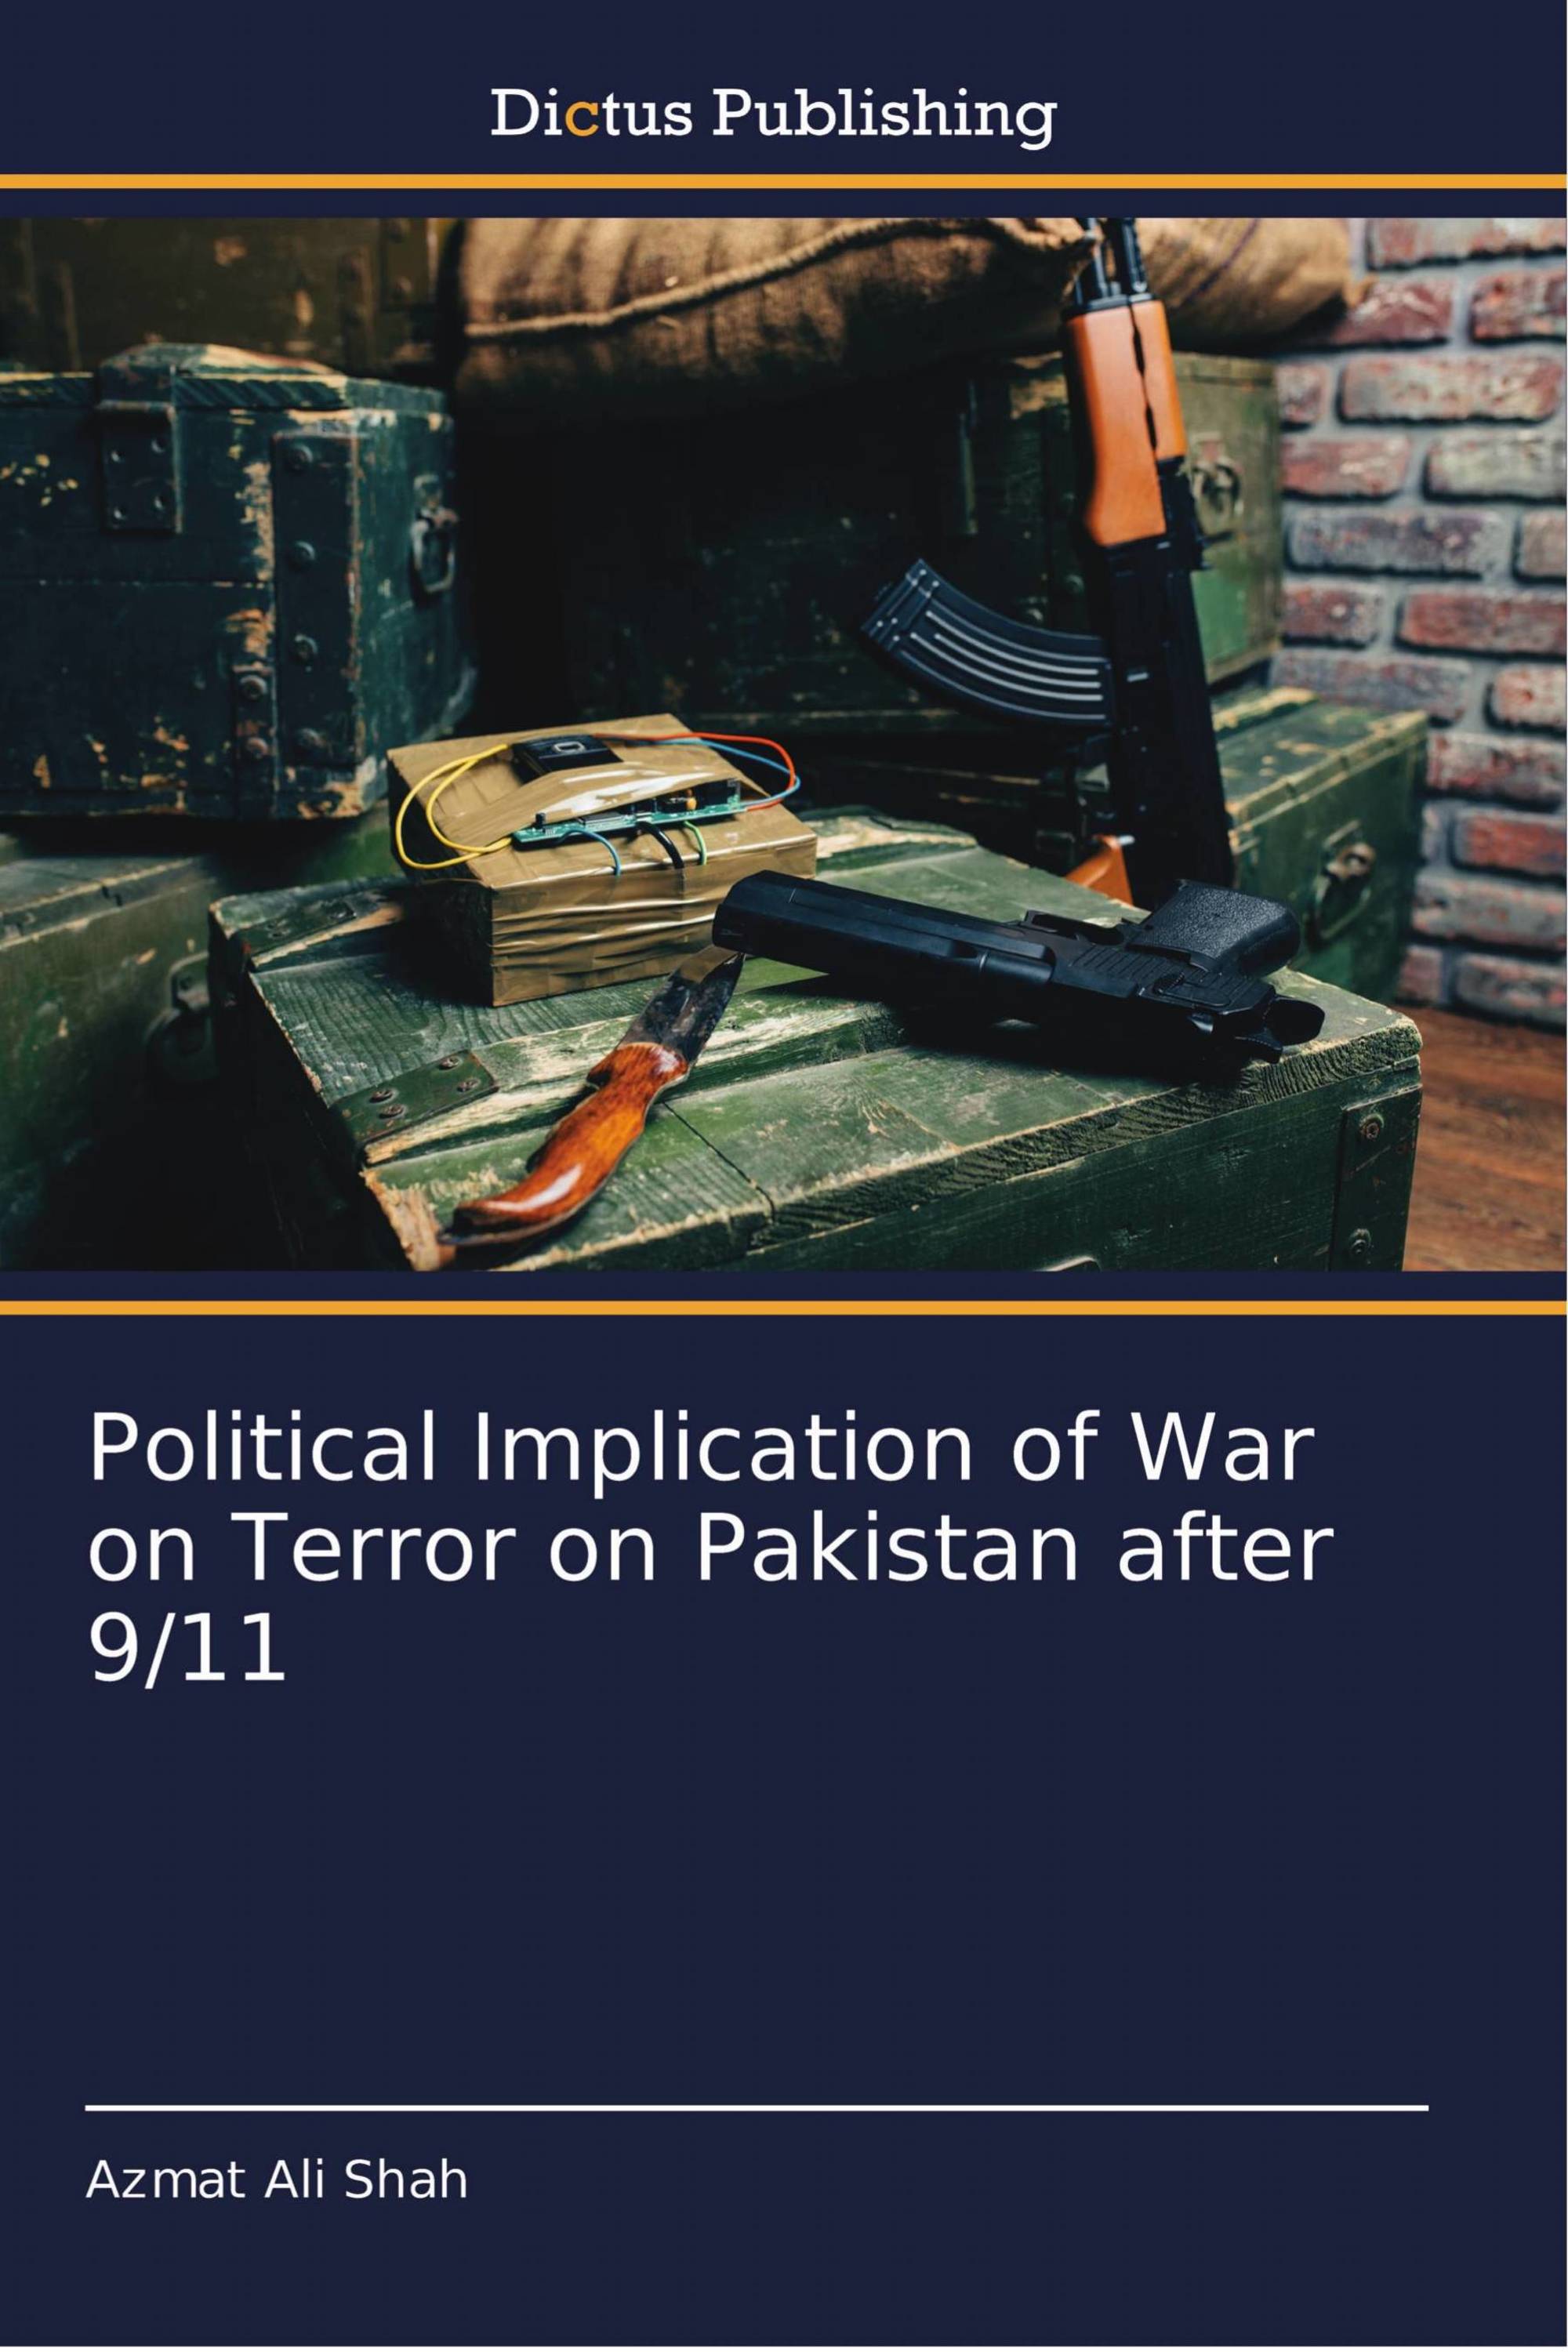 Political Implication of War on Terror on Pakistan after 9/11